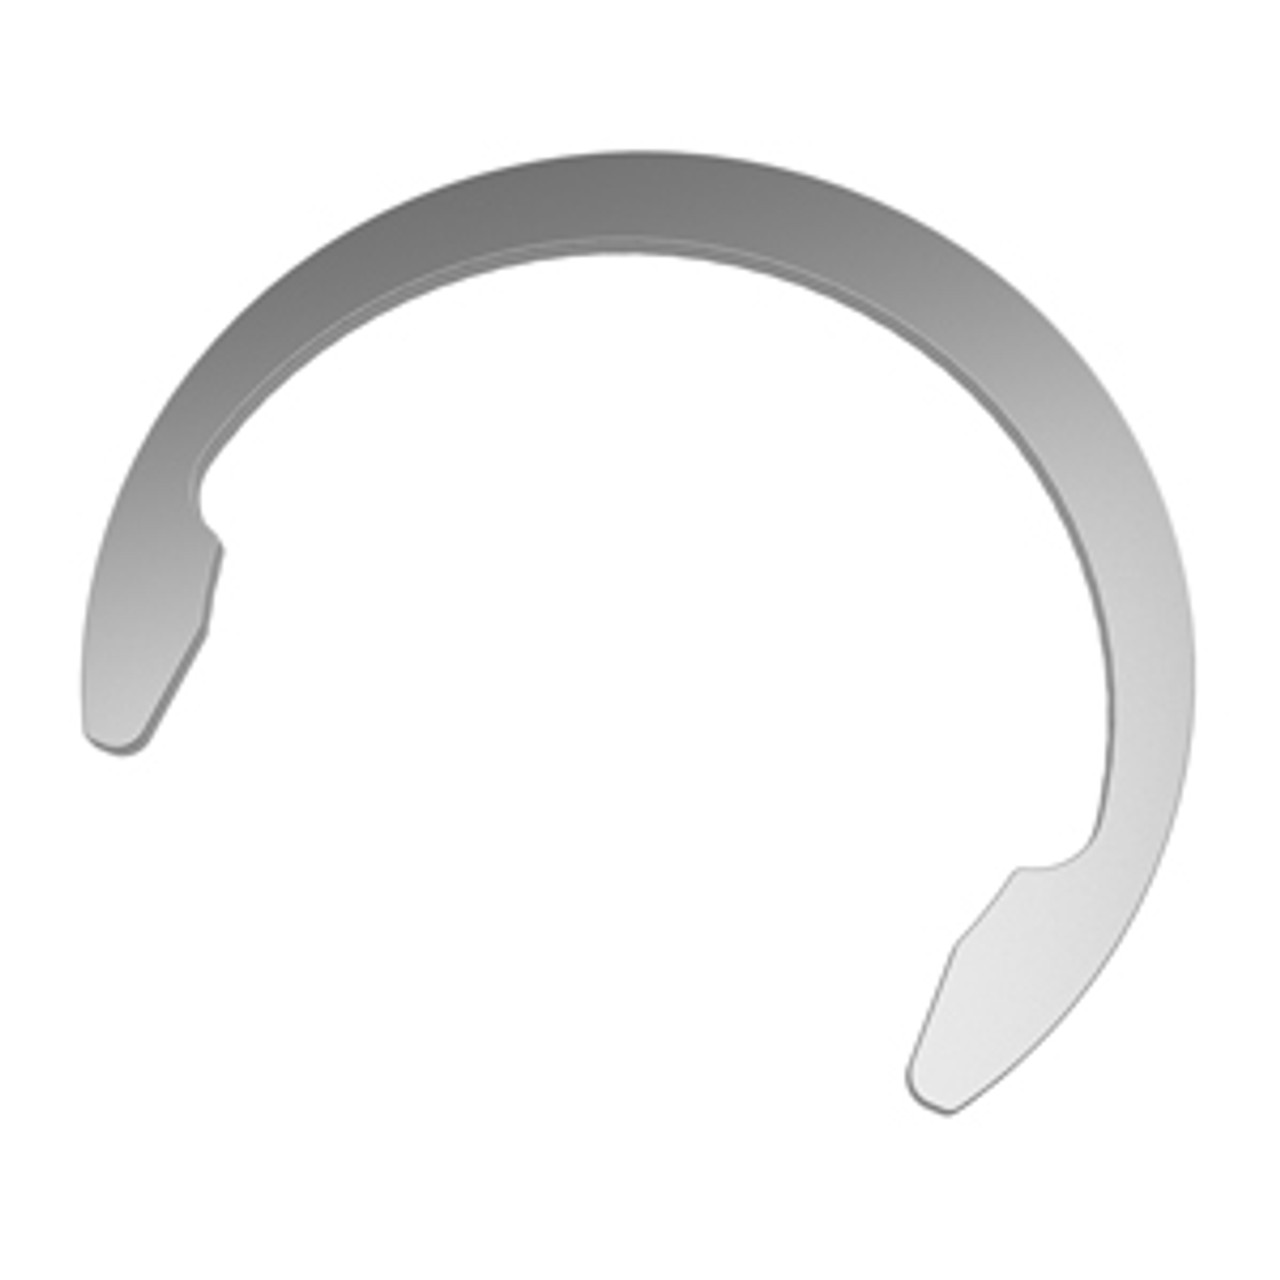 External Metric Phosphated Low Profile Crescent Retaining Ring  DC-030-PA